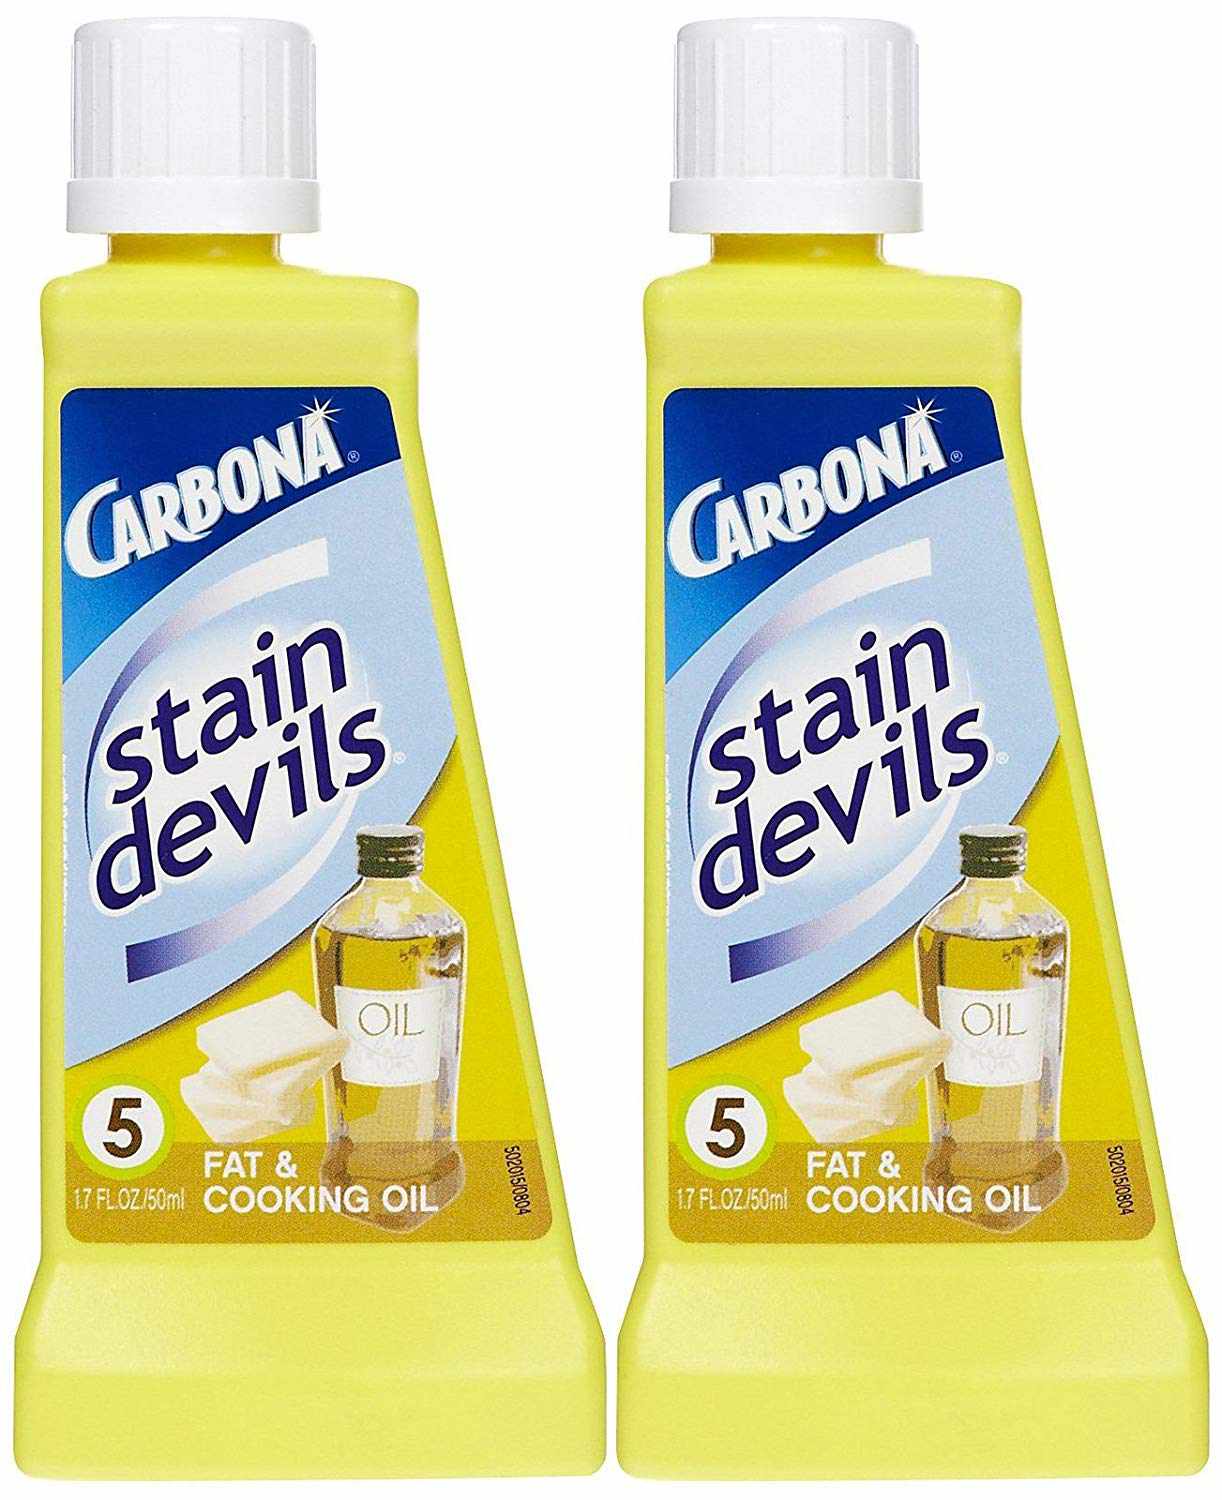 Specialized Stain Removers for Fat and Oil